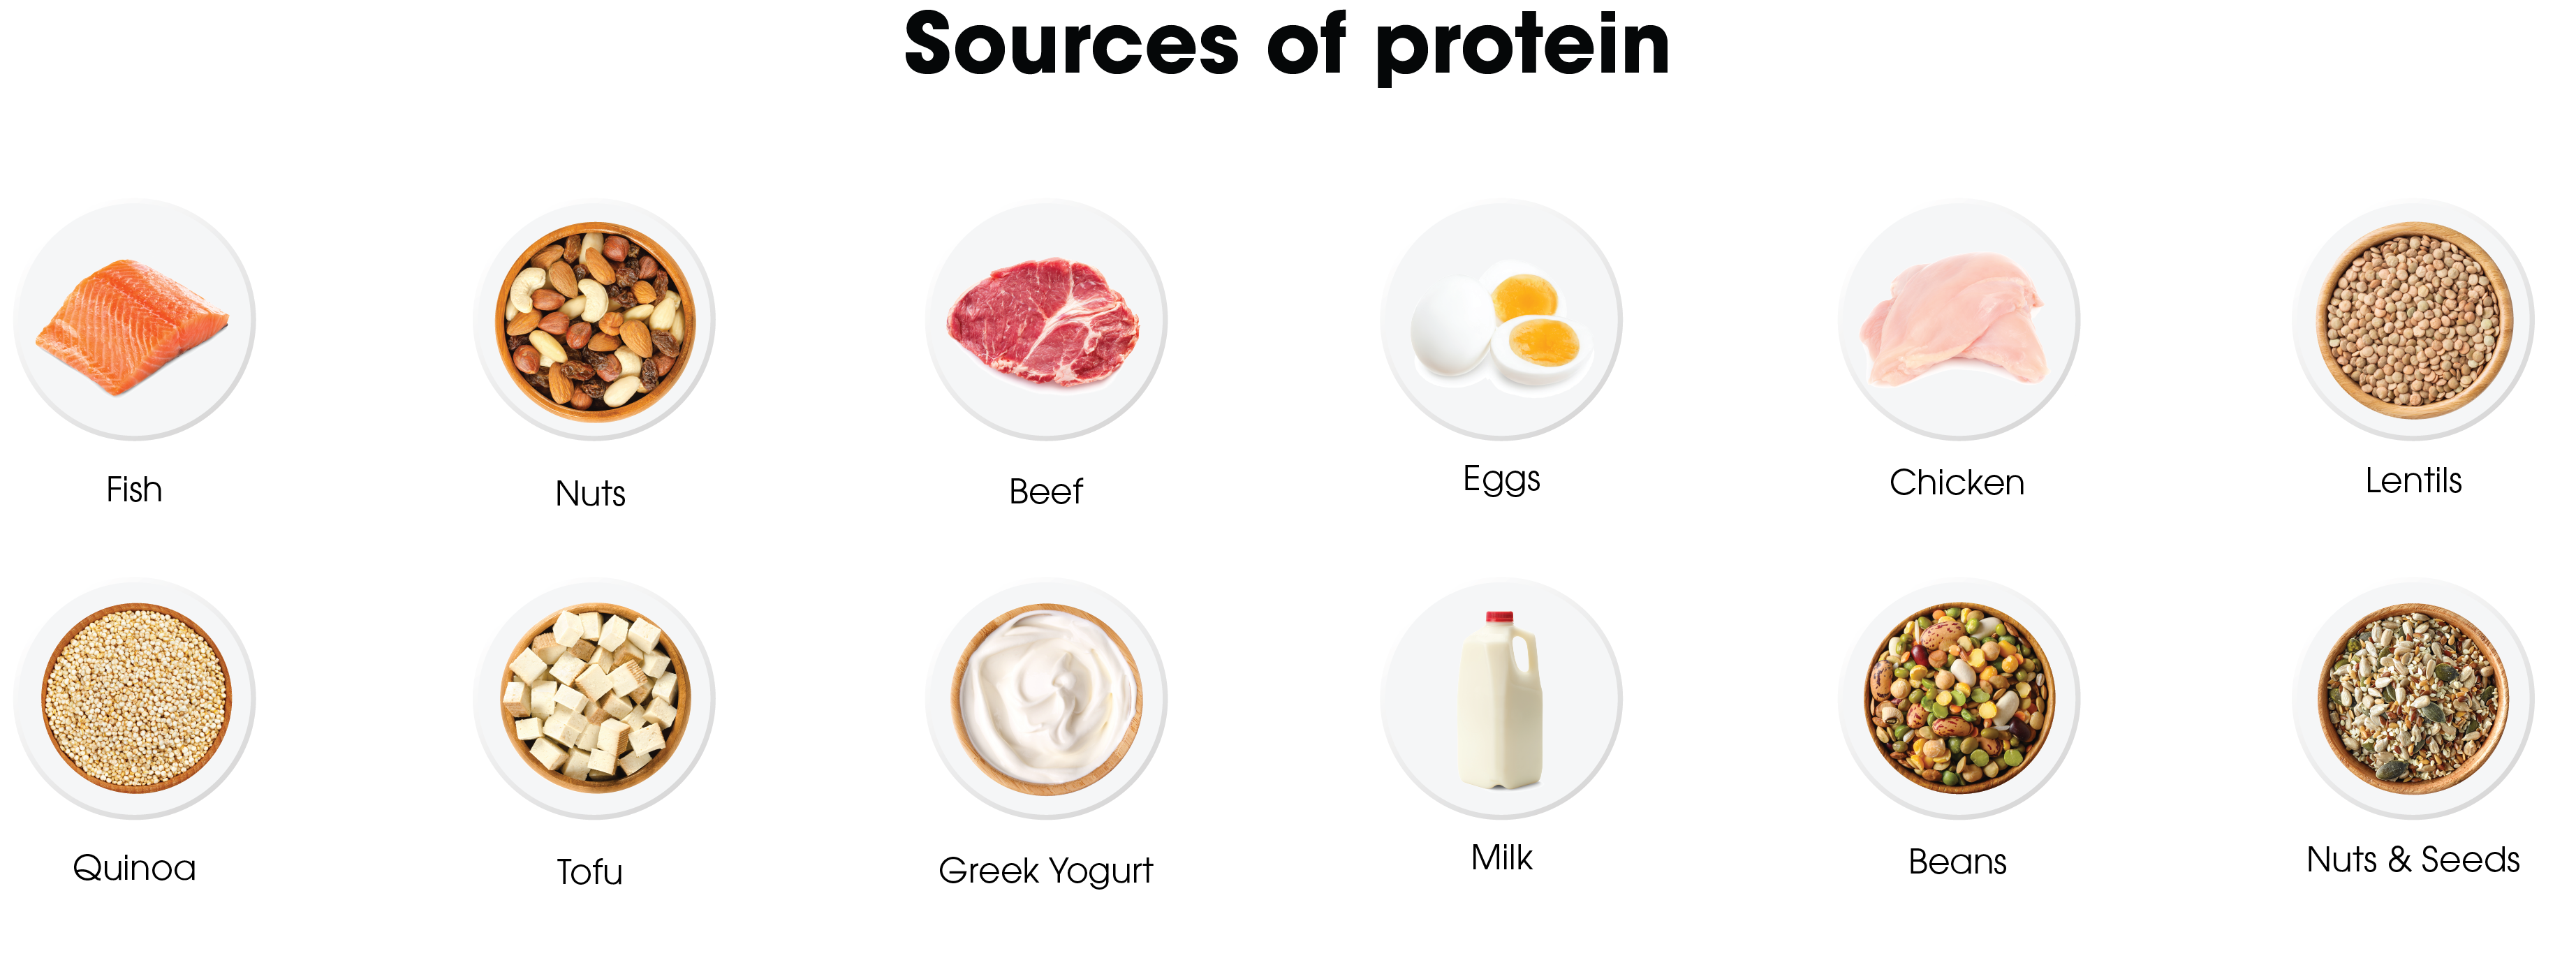 Sourced of protein